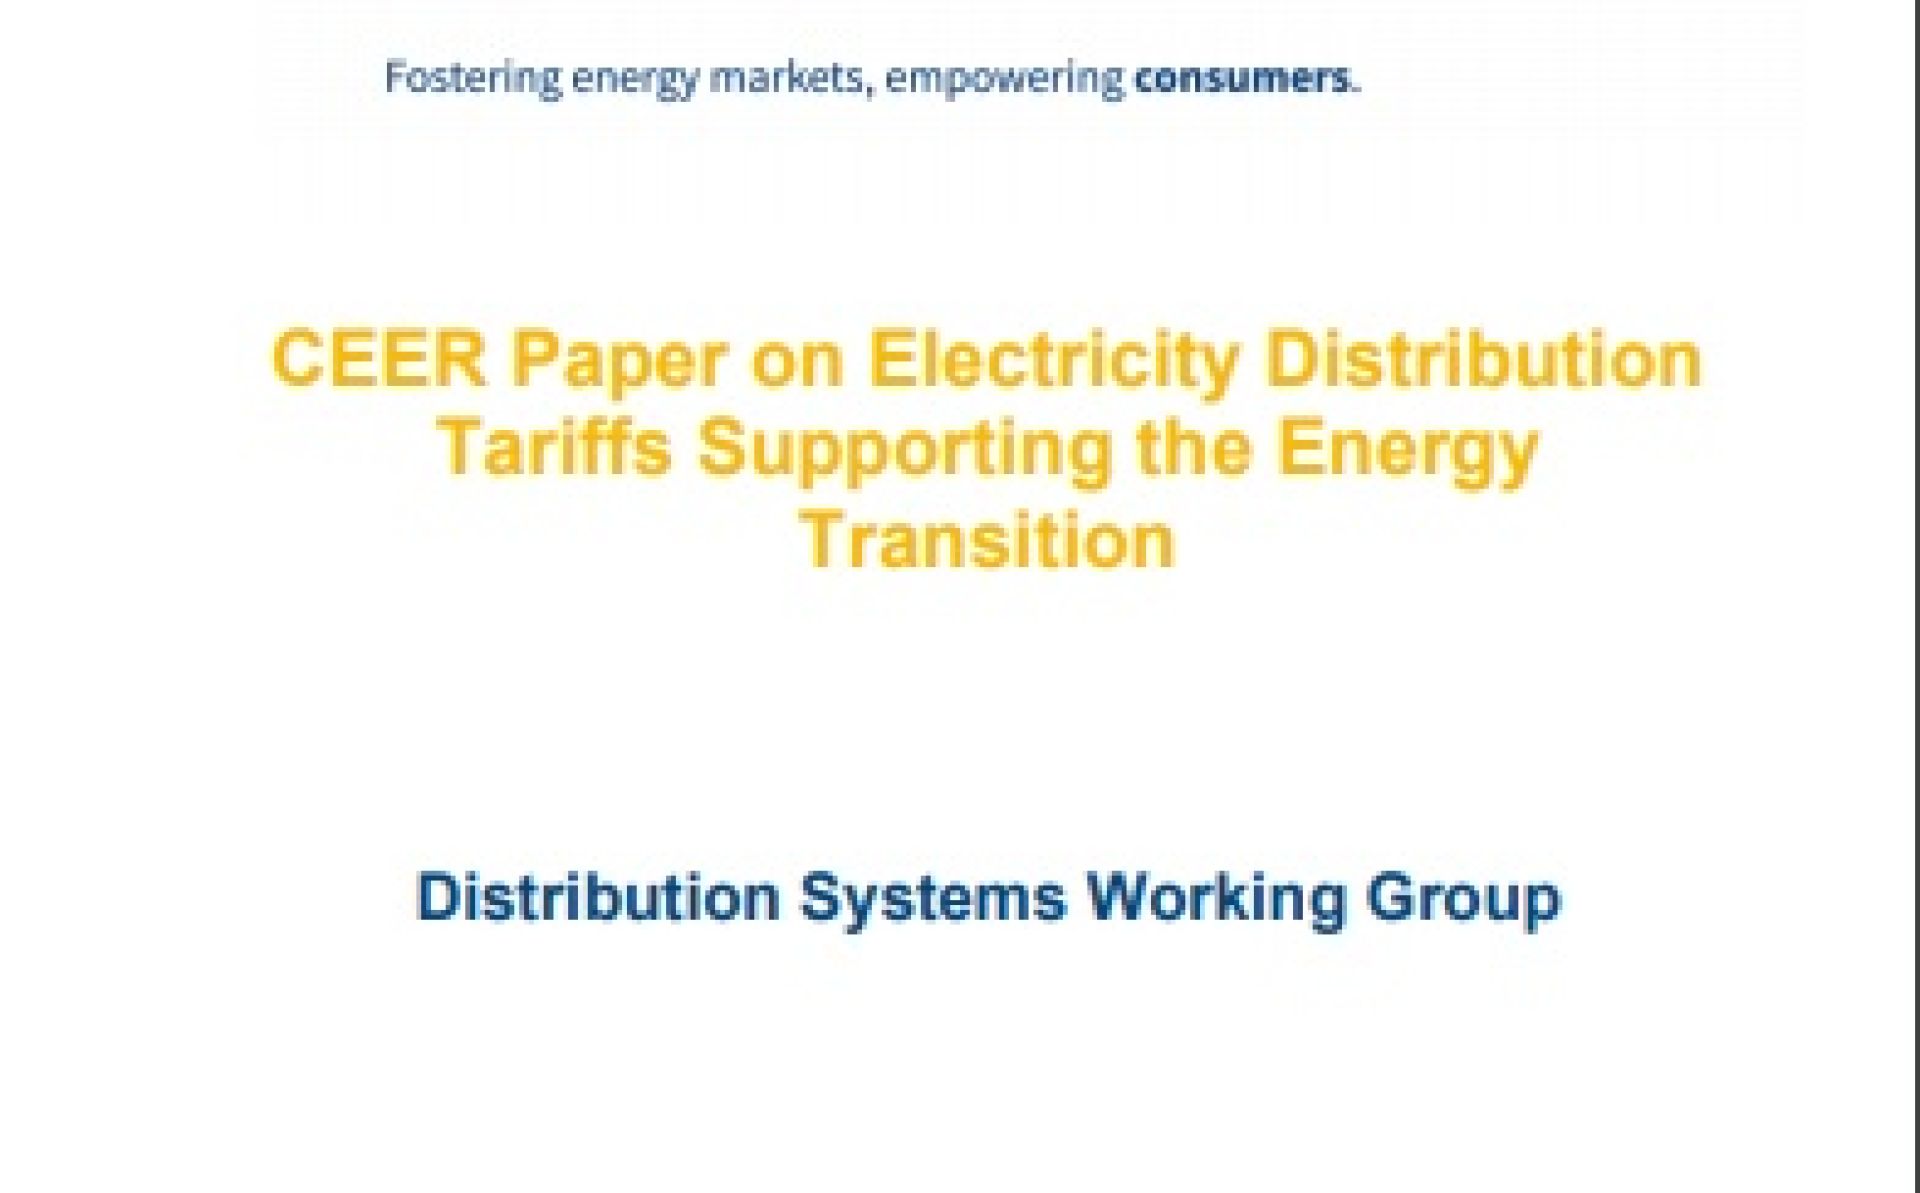 CEER Paper on Electricity Distribution Tariffs Supporting the Energy Transition